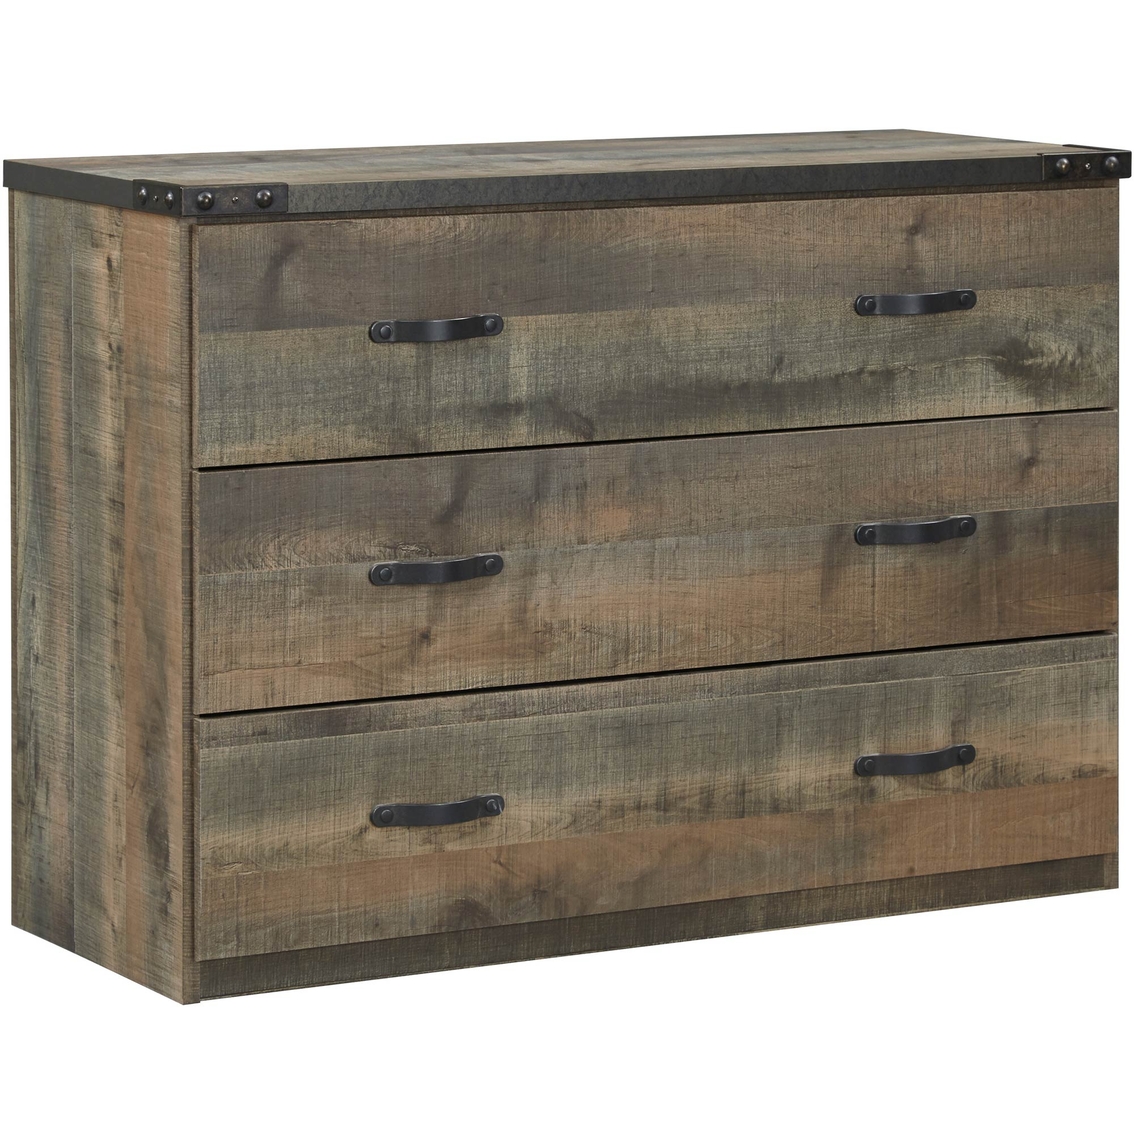 Signature Design by Ashley Trinell Loft with Drawer Storage - Image 3 of 3